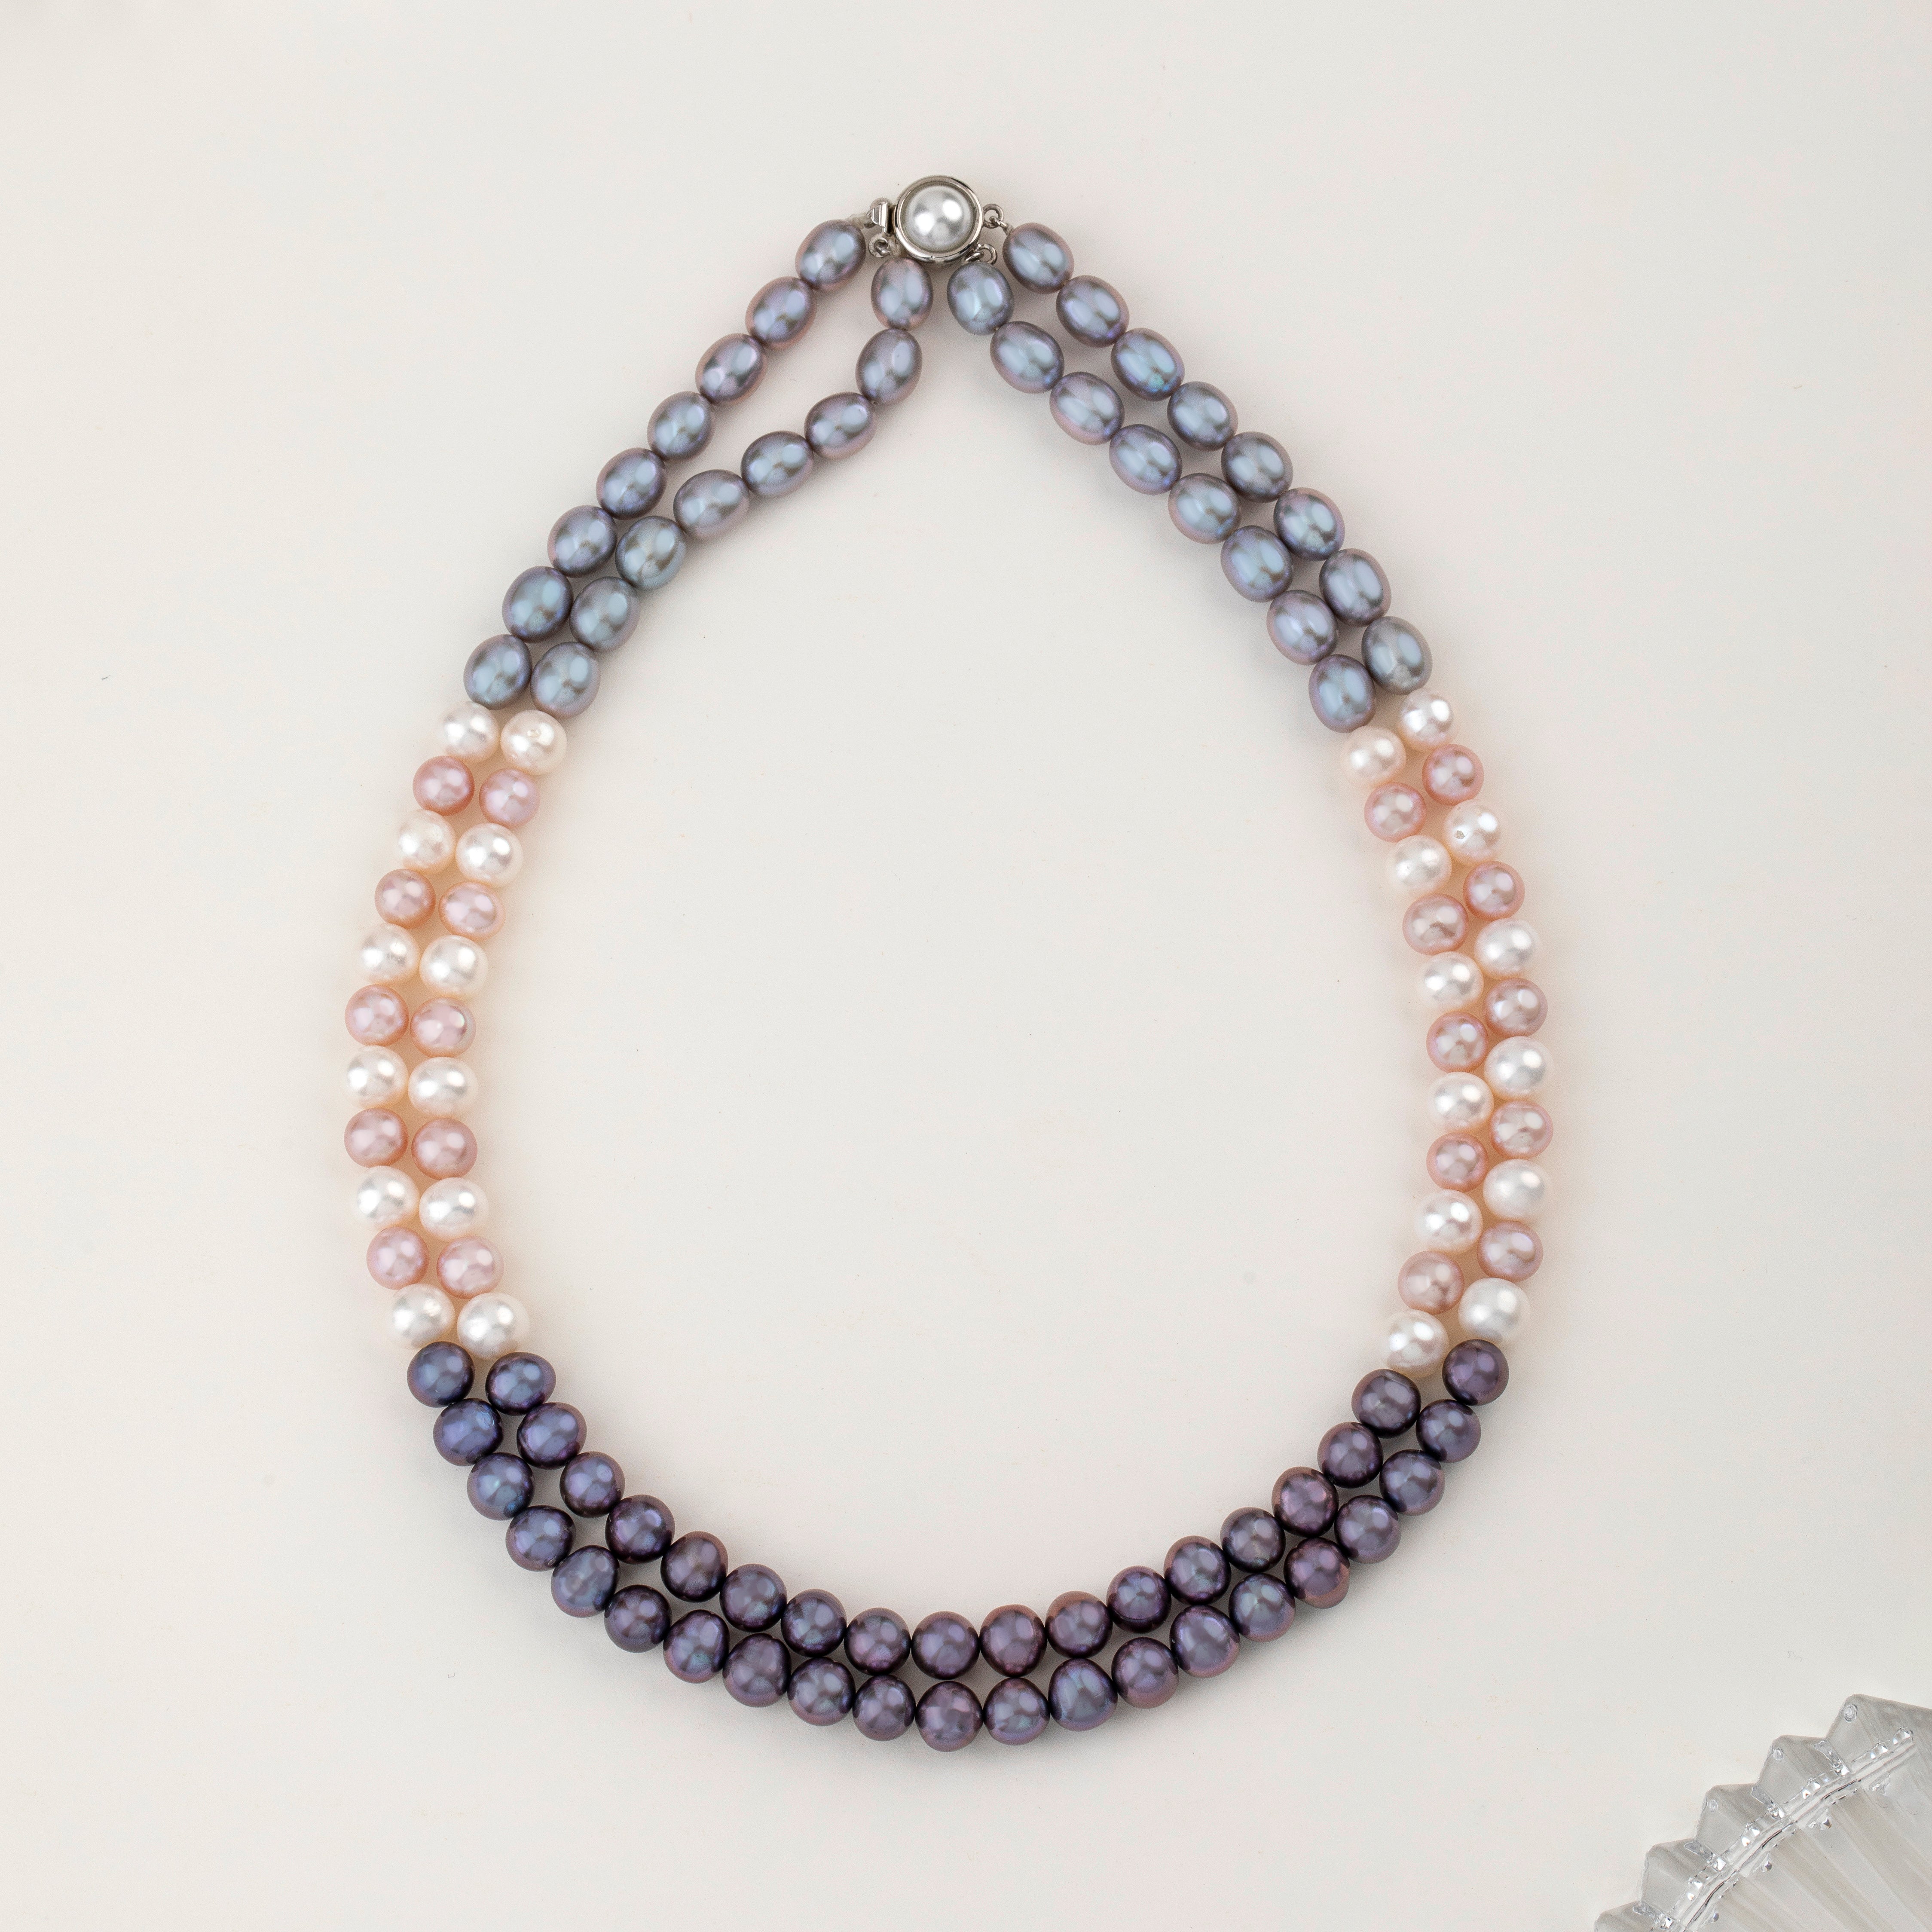 Multi-Hued Elegance Mixed 2-Line Freshwater Pearl Necklace